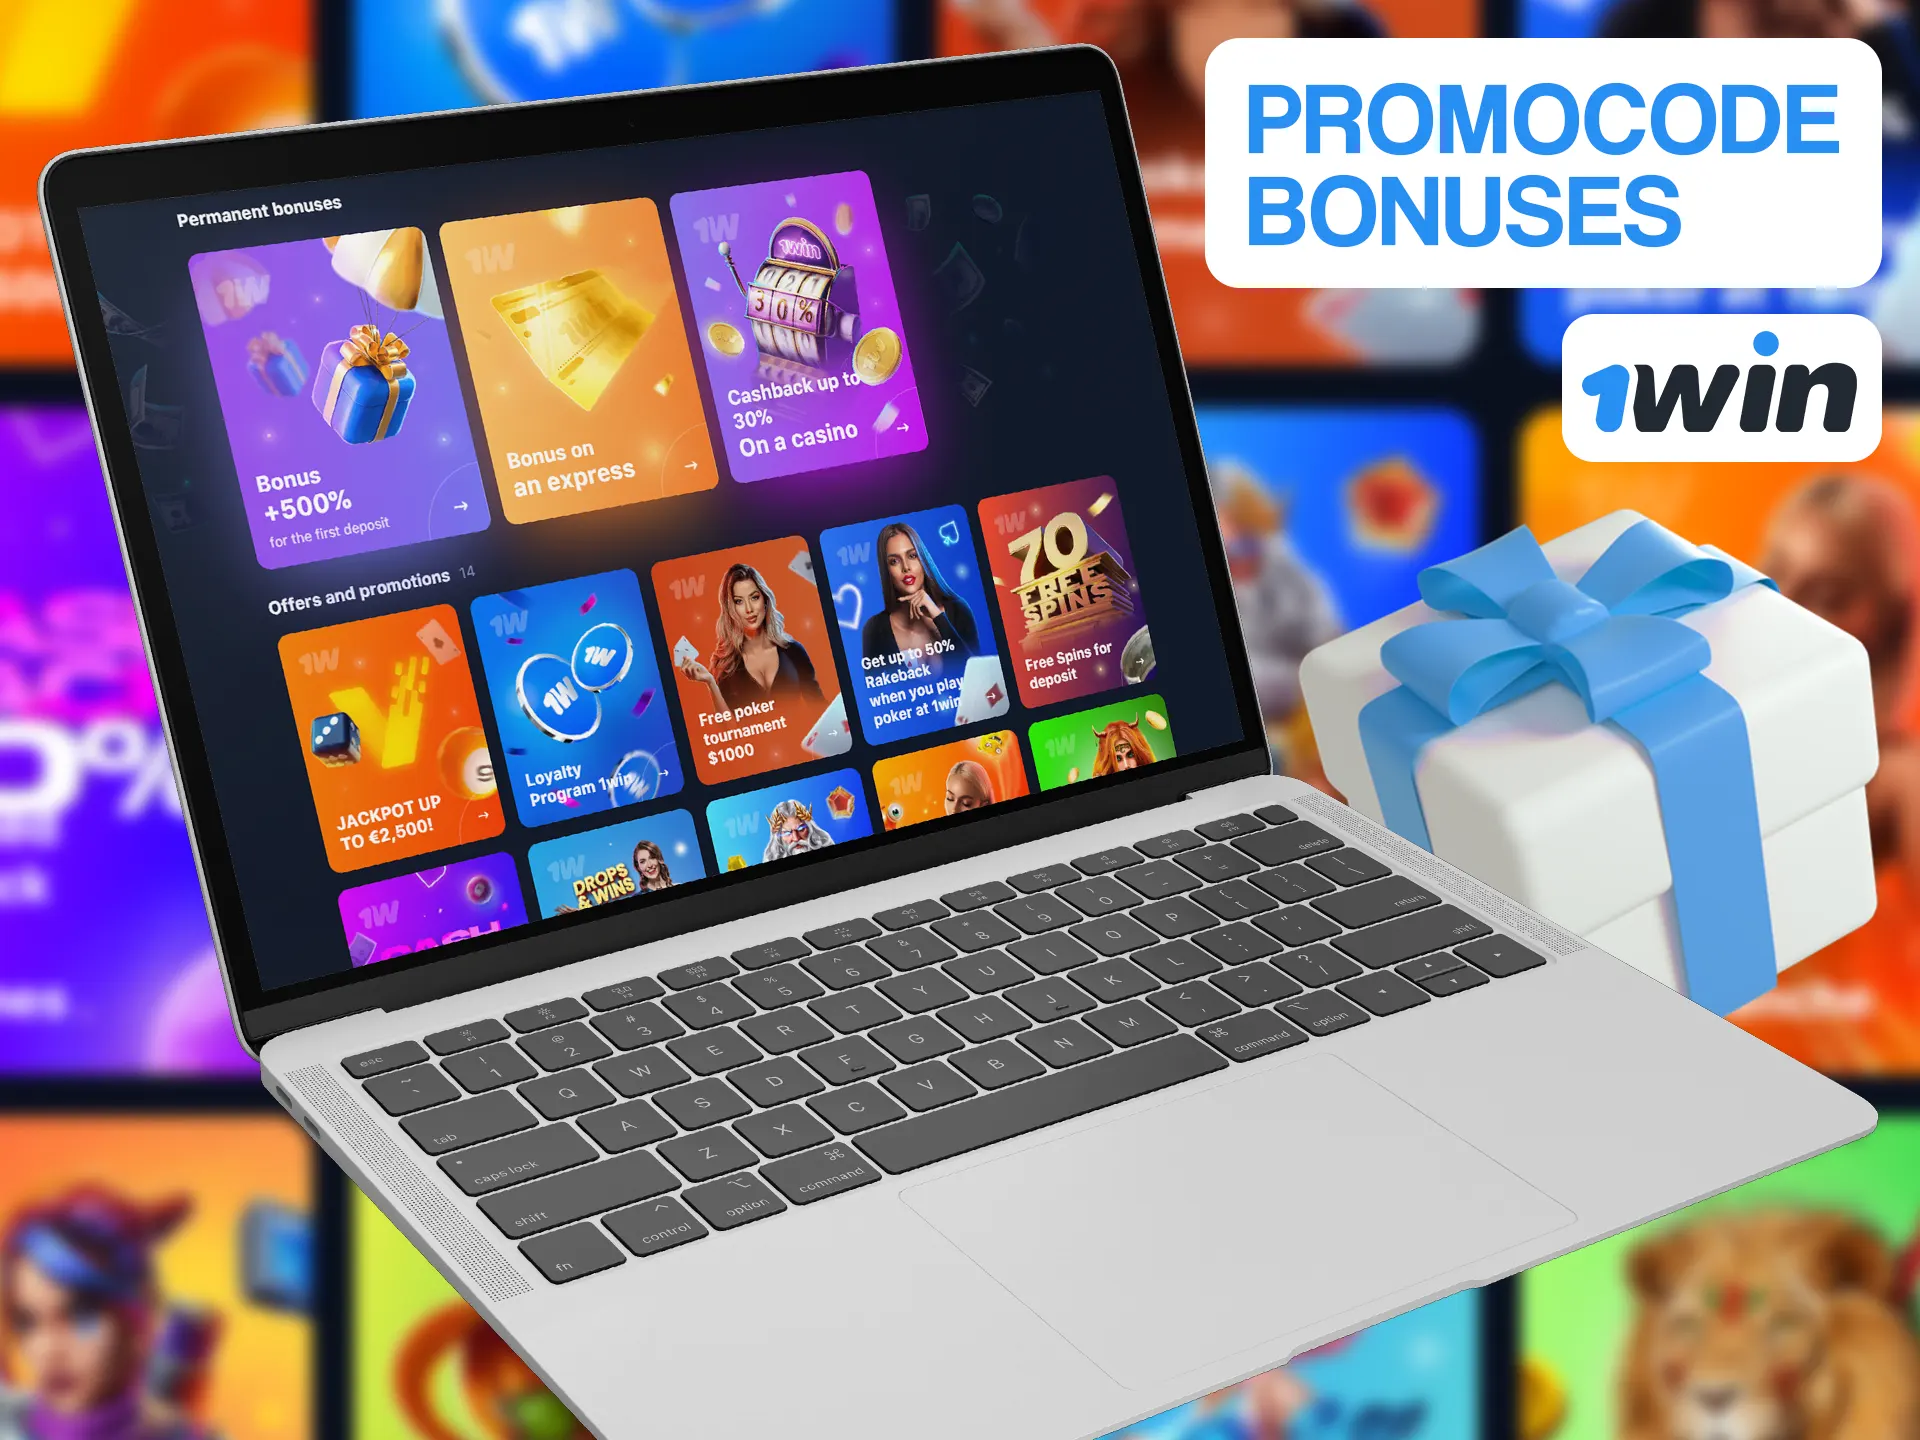 Get all of available 1win promocode bonuses on special page.